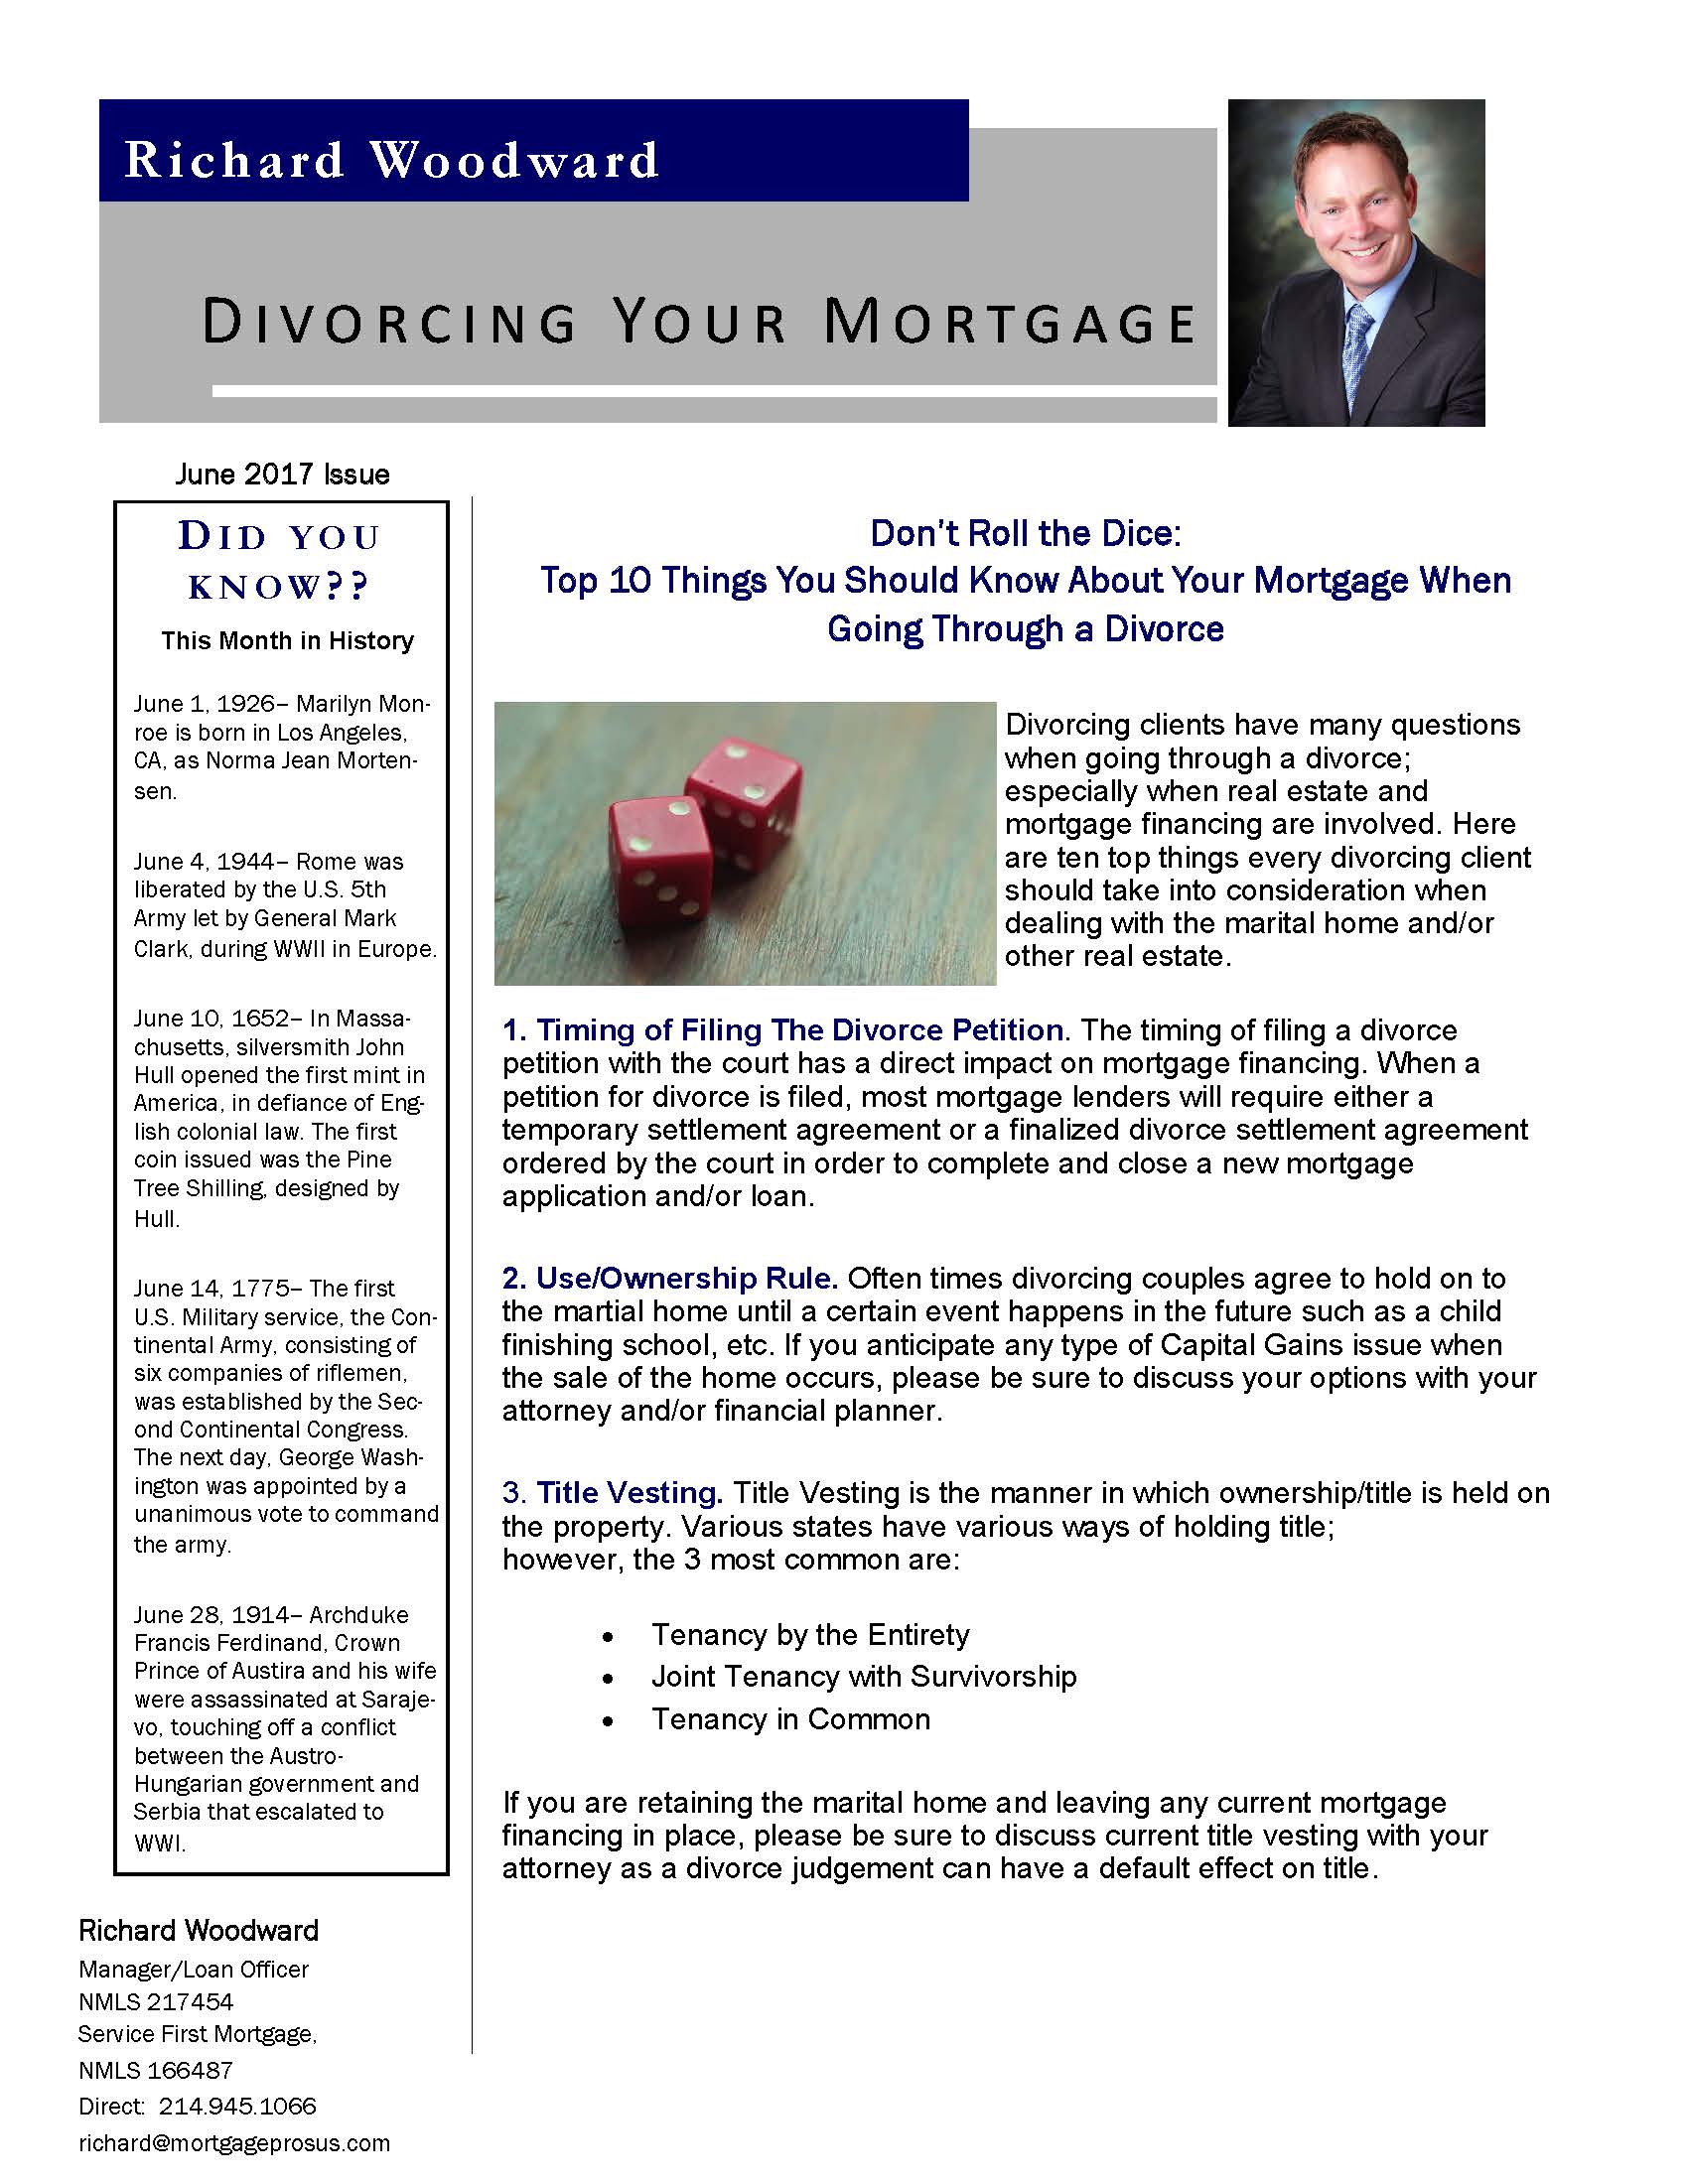 Divorcing_Your_Mortgage_June_2017_Page_1.jpg